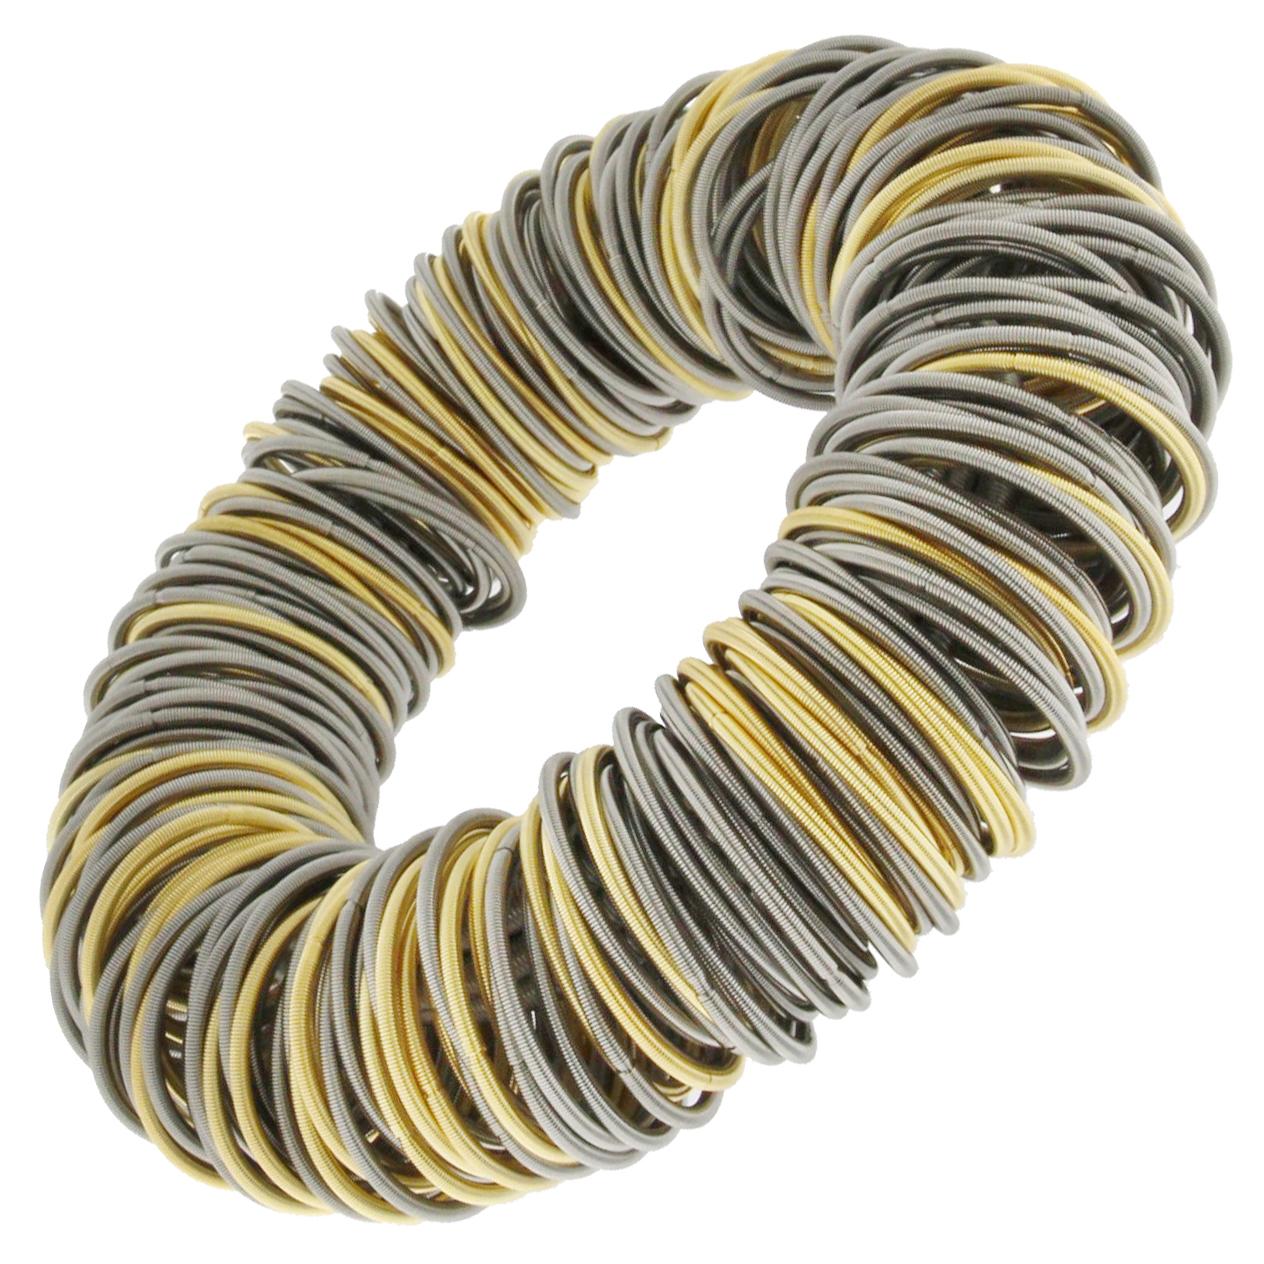 Balanced between the exotic and the industrial, the Maxi One stainless steel and gold plated bracelet is strikingly elegant. The hardness of steel is softened by a clever structure of elastic hoops of finely spun springs, some plated with gold. By